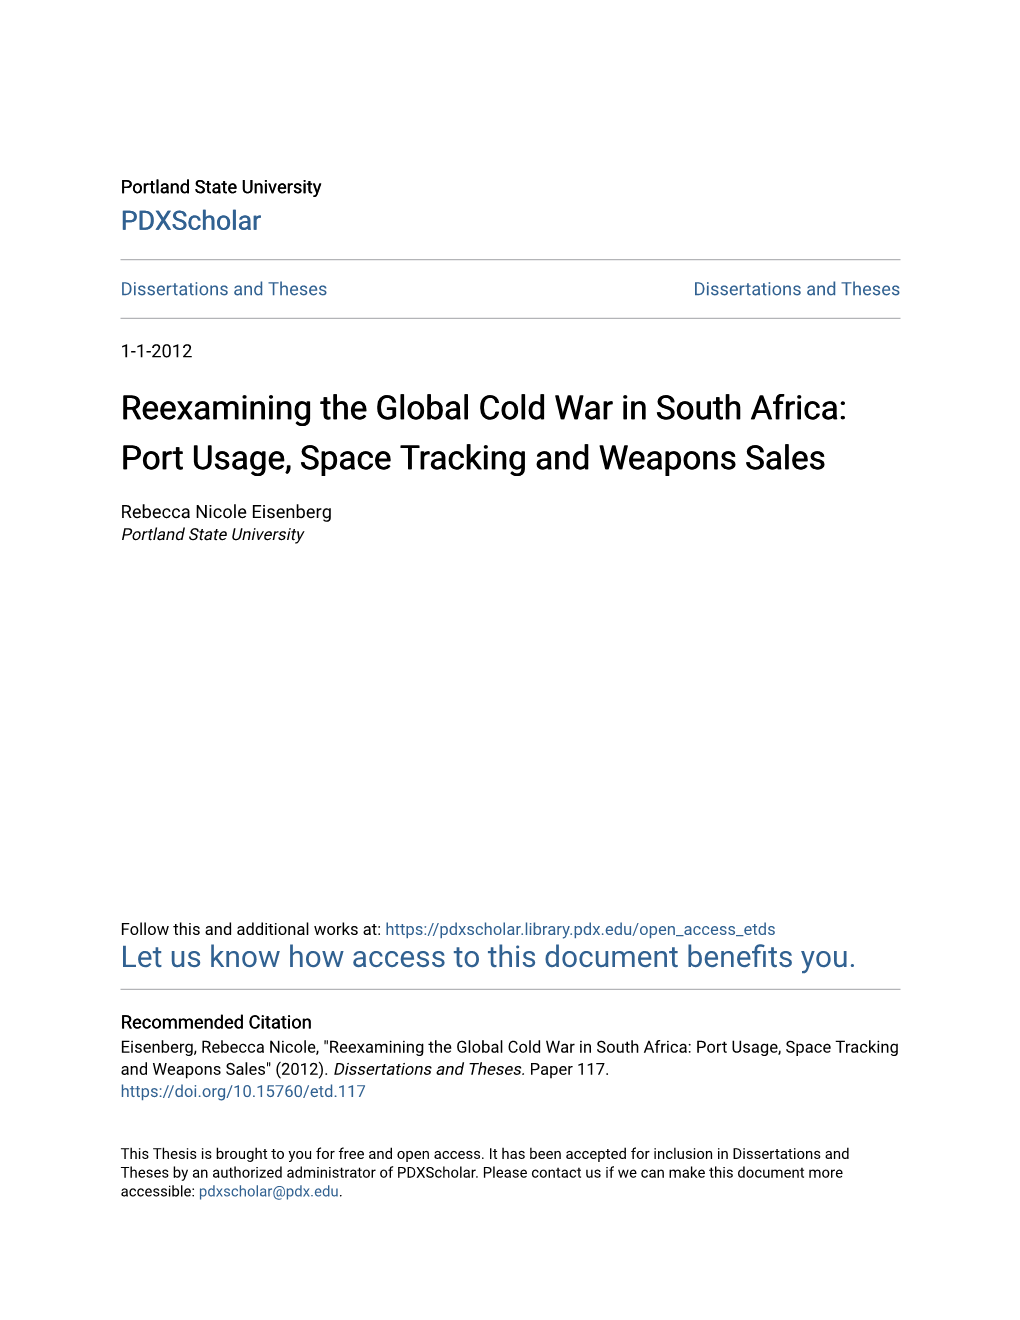 Reexamining the Global Cold War in South Africa: Port Usage, Space Tracking and Weapons Sales